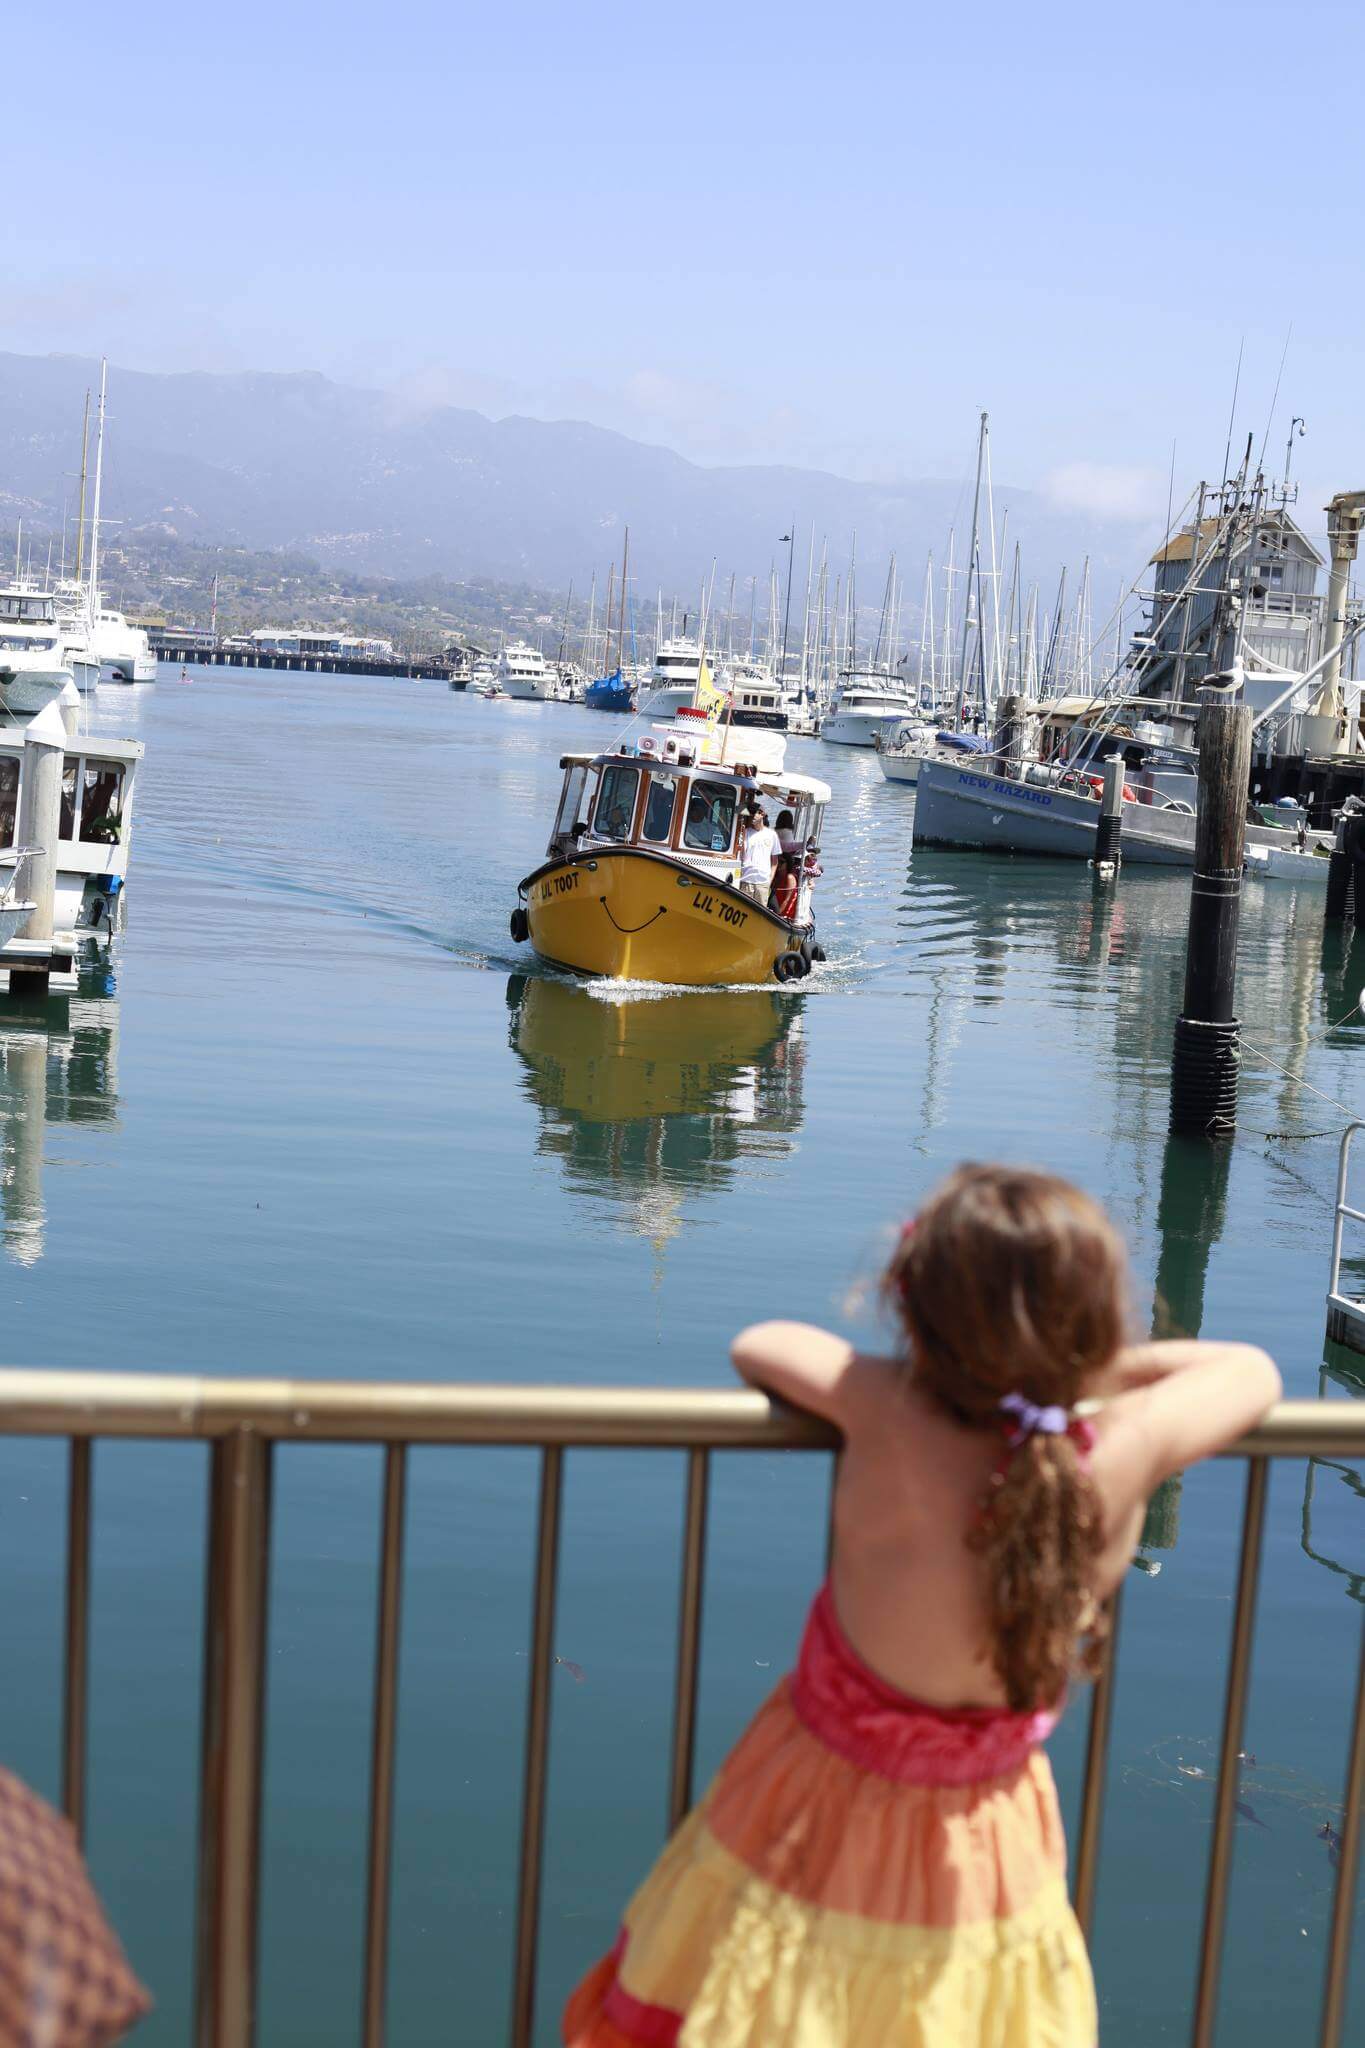 A cute yellow boat in the Santa Barbara harbor approaches a little girl wearing a bright orange, pink, and yellow dress. 